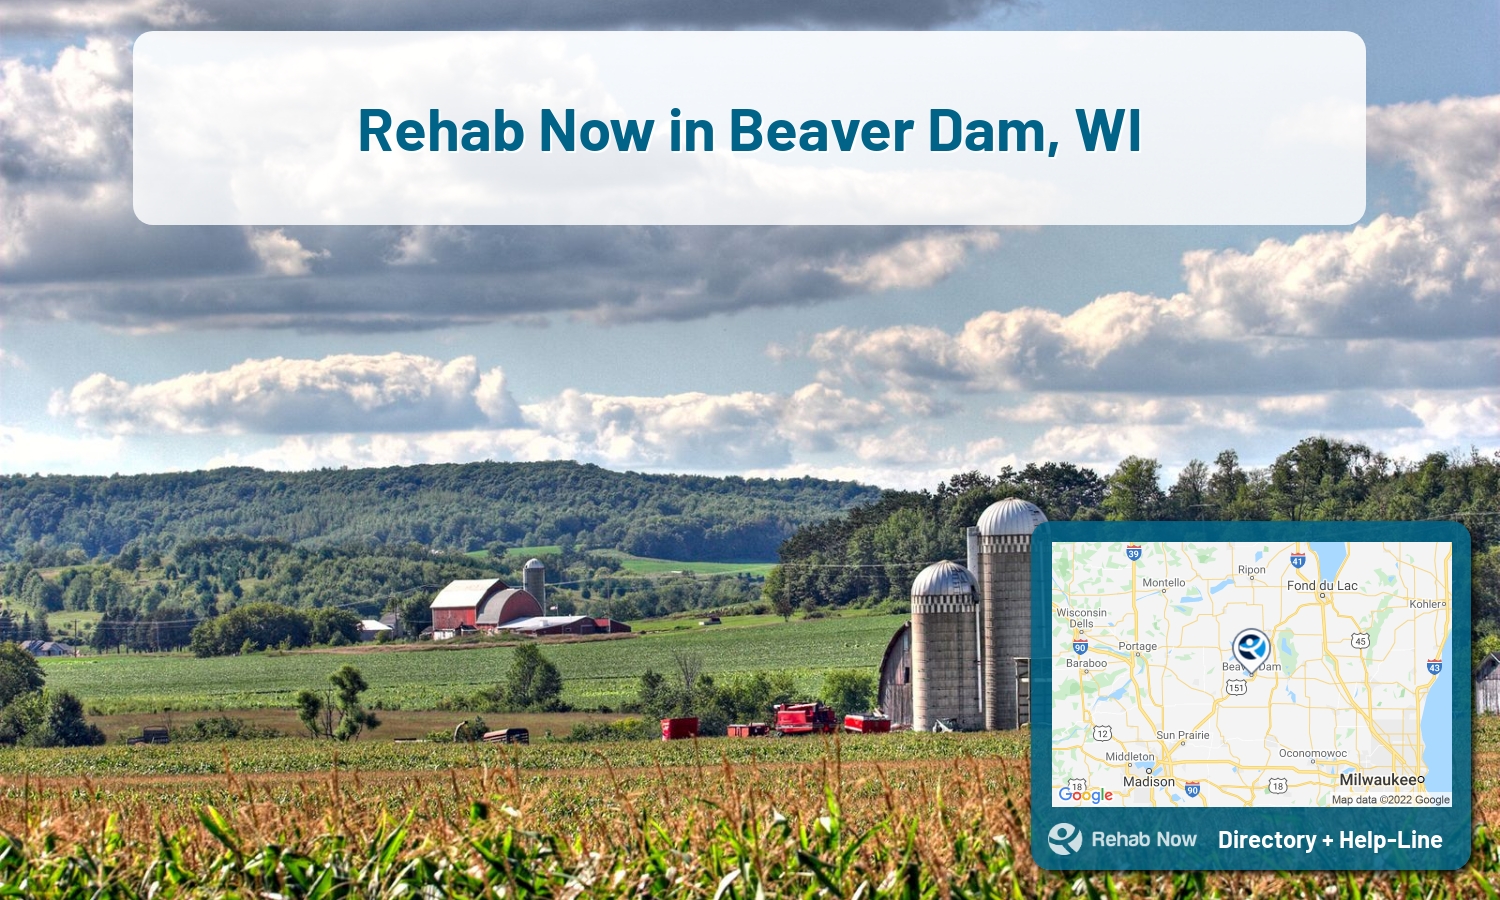 Beaver Dam, WI Treatment Centers. Find drug rehab in Beaver Dam, Wisconsin, or detox and treatment programs. Get the right help now!